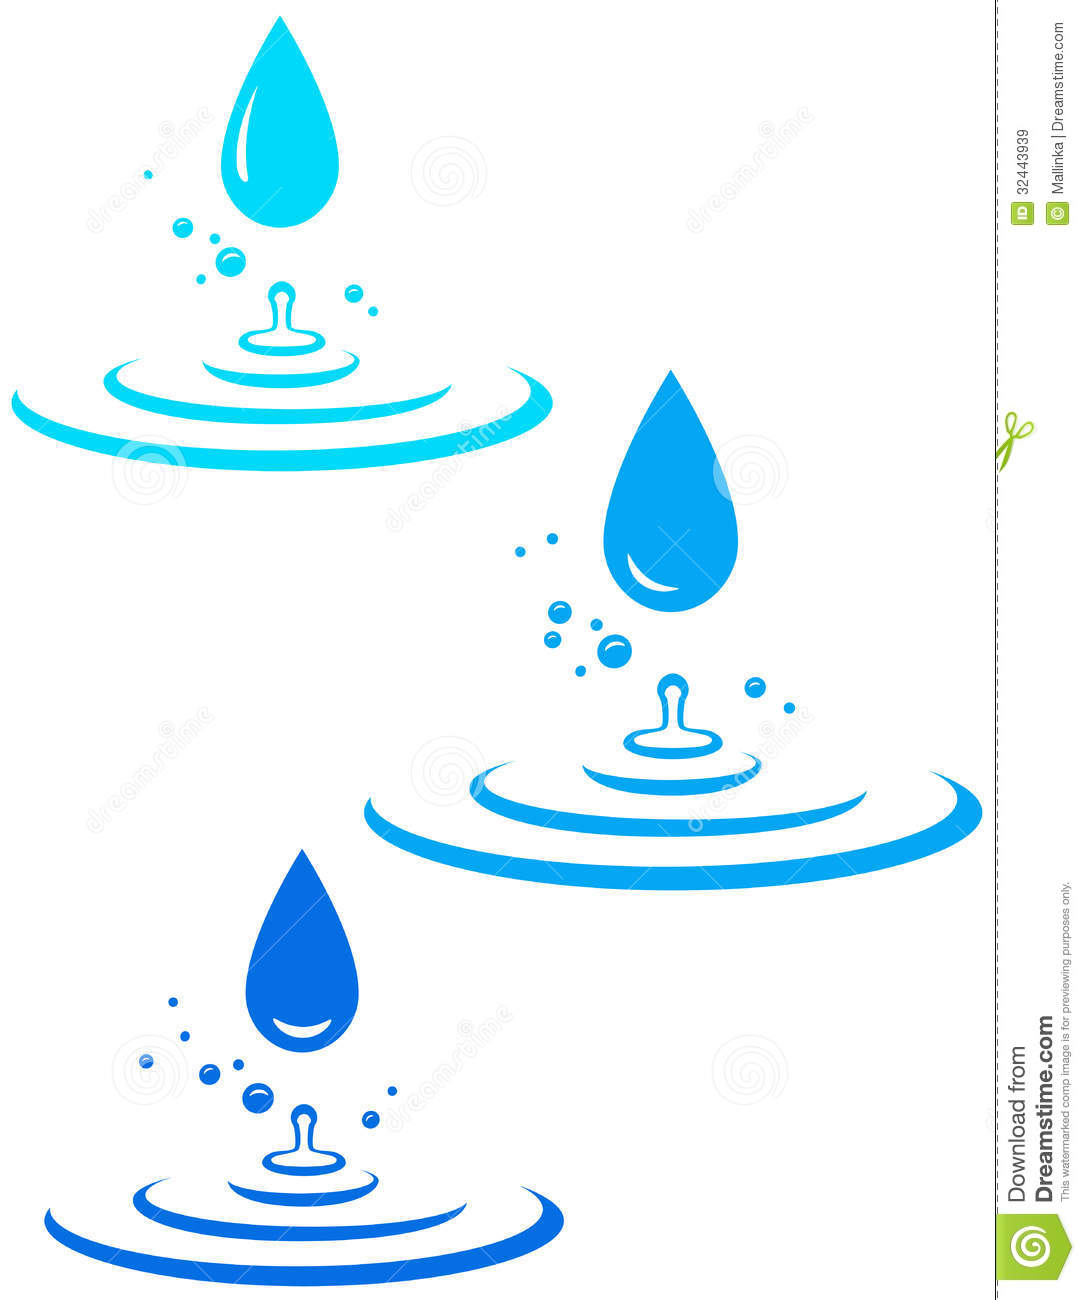 Splash With Many Water Drops Royalty Free Stock Images   Image